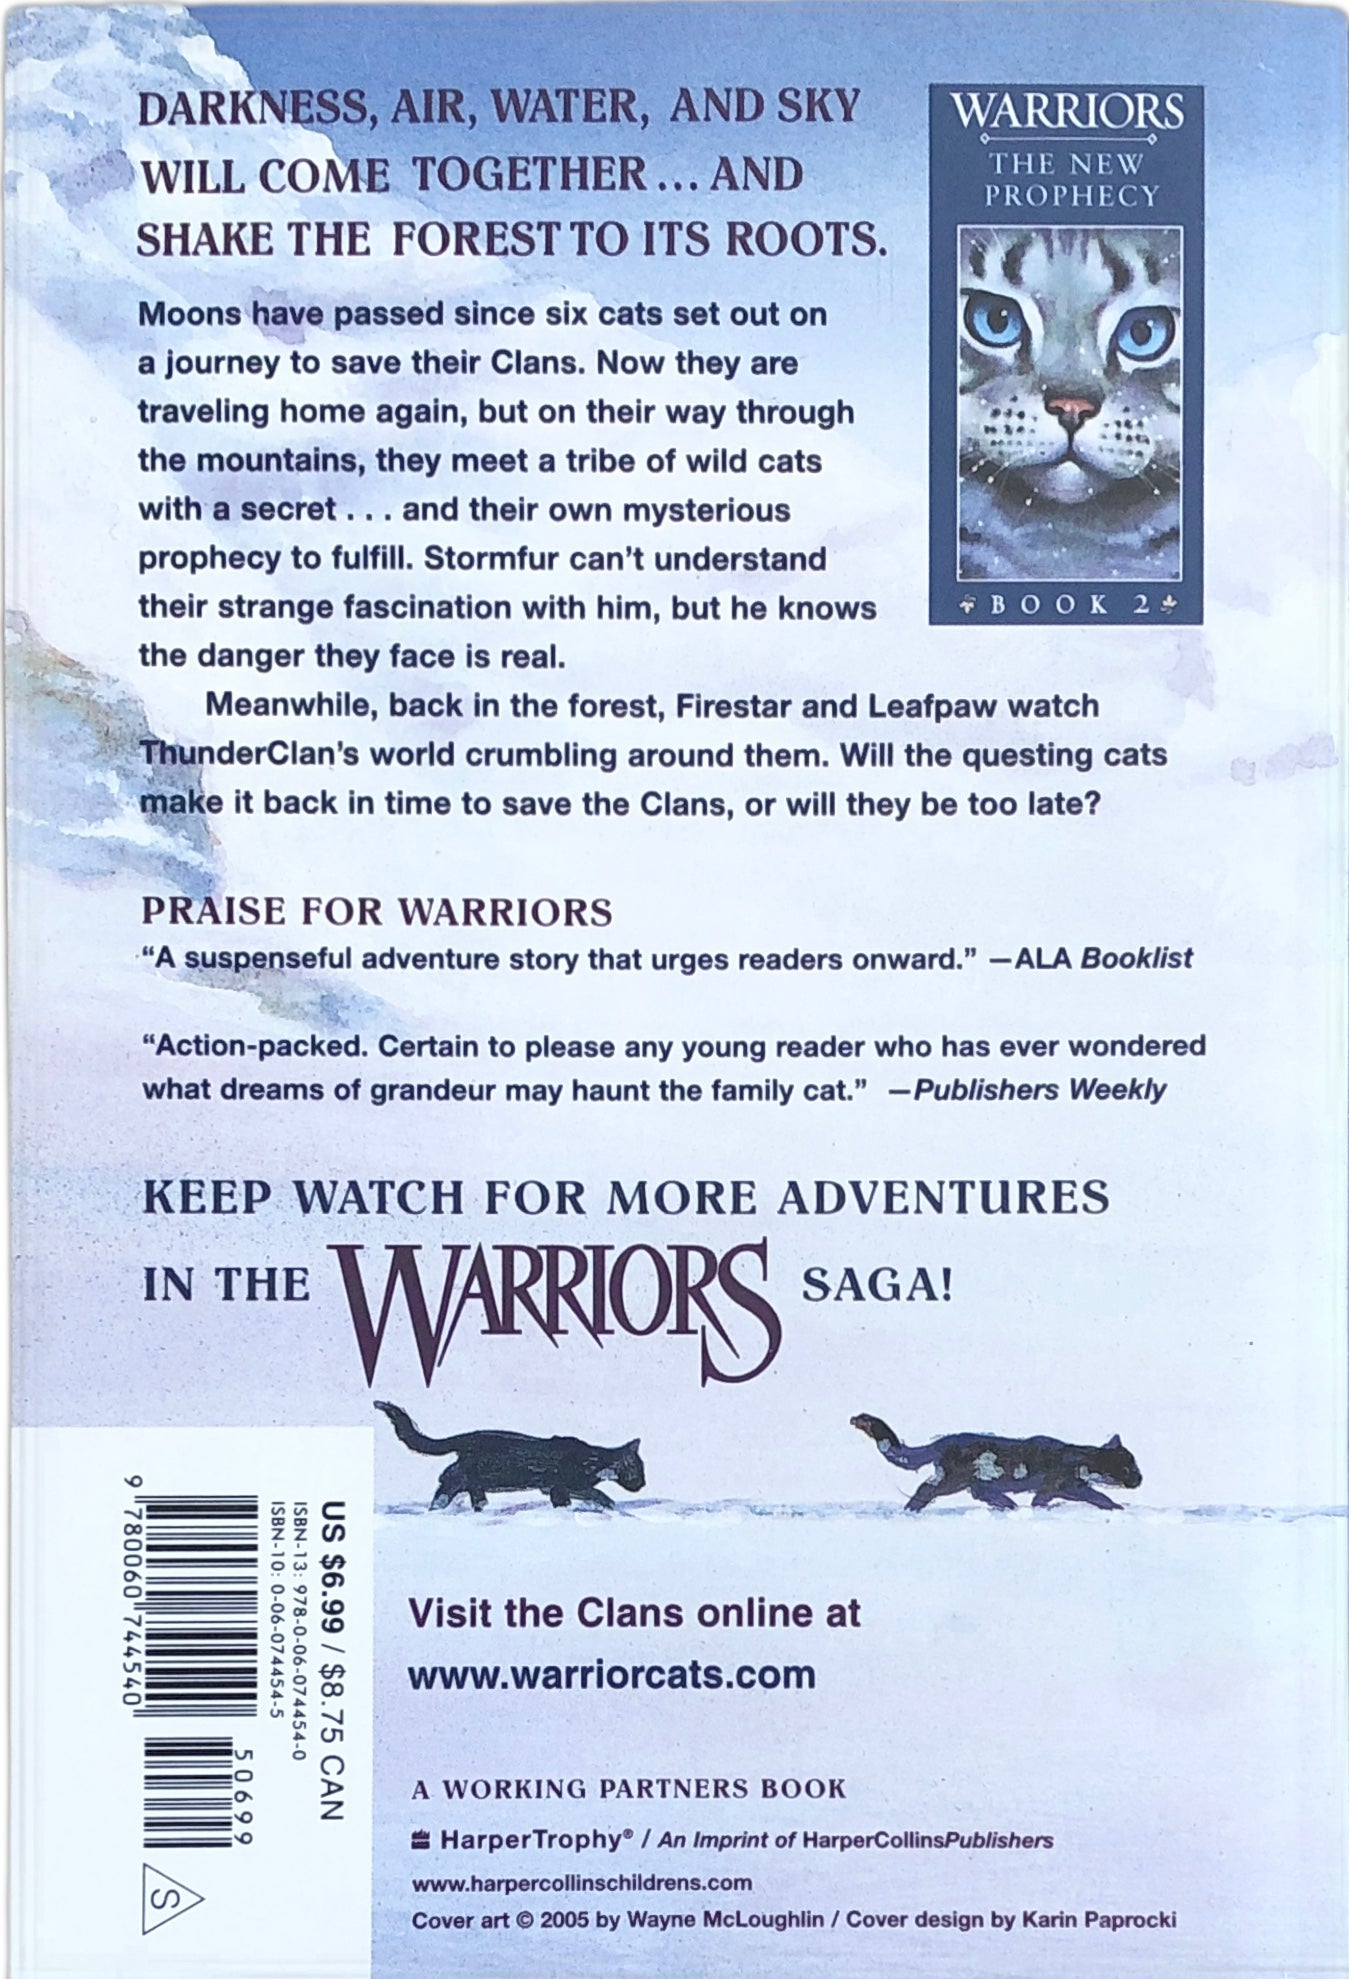 Warriors Ser.: The New Prophecy: Midnight by Erin Hunter (2005